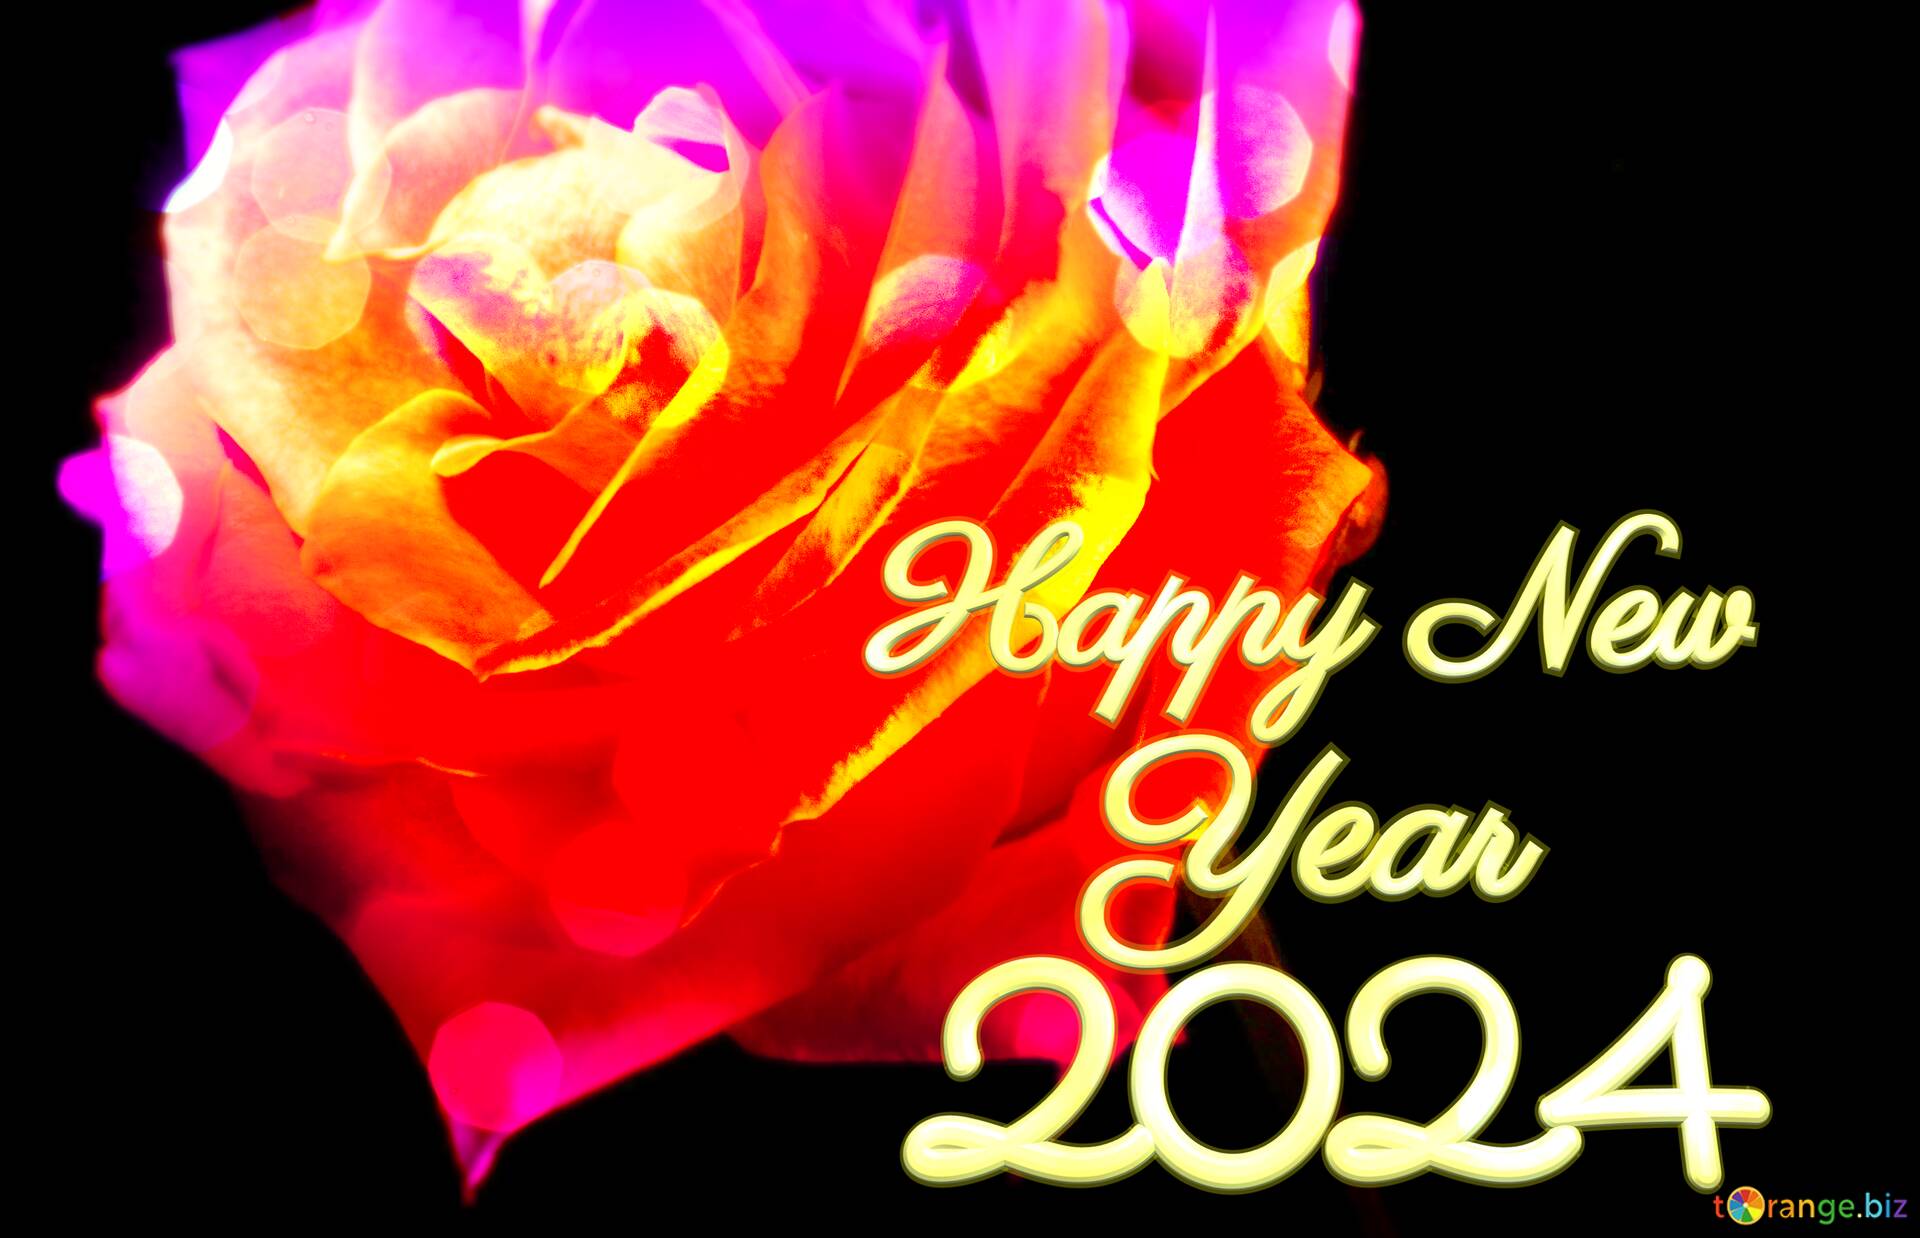 Download free picture Fire Rose background Happy New Year 2024 on CC-BY  License ~ Free Image Stock  ~ fx №220363